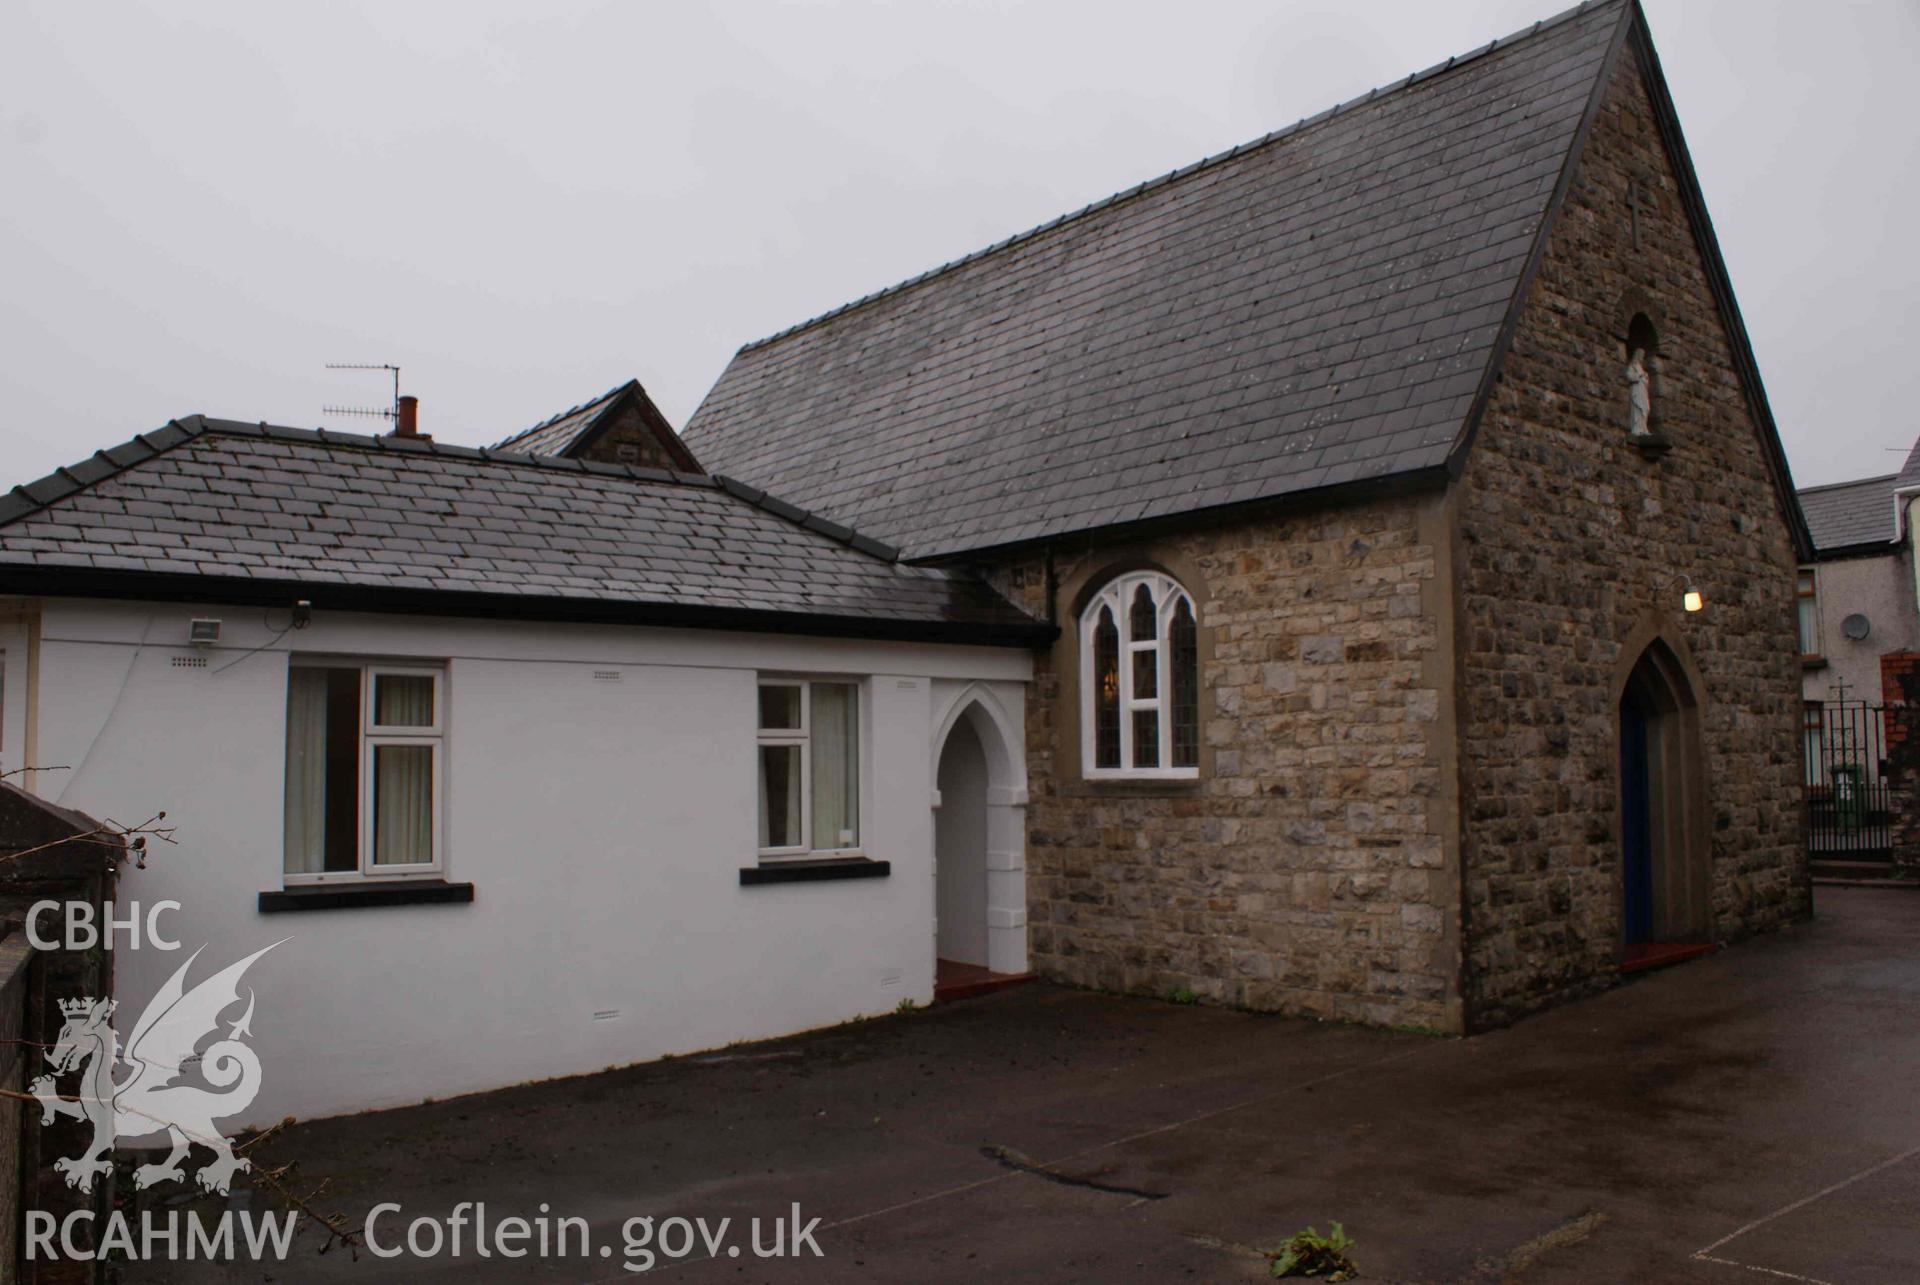 Digital colour photograph showing the presbytery and exterior of Sacred Heart and St Felix Catholic church, Blaenavon.